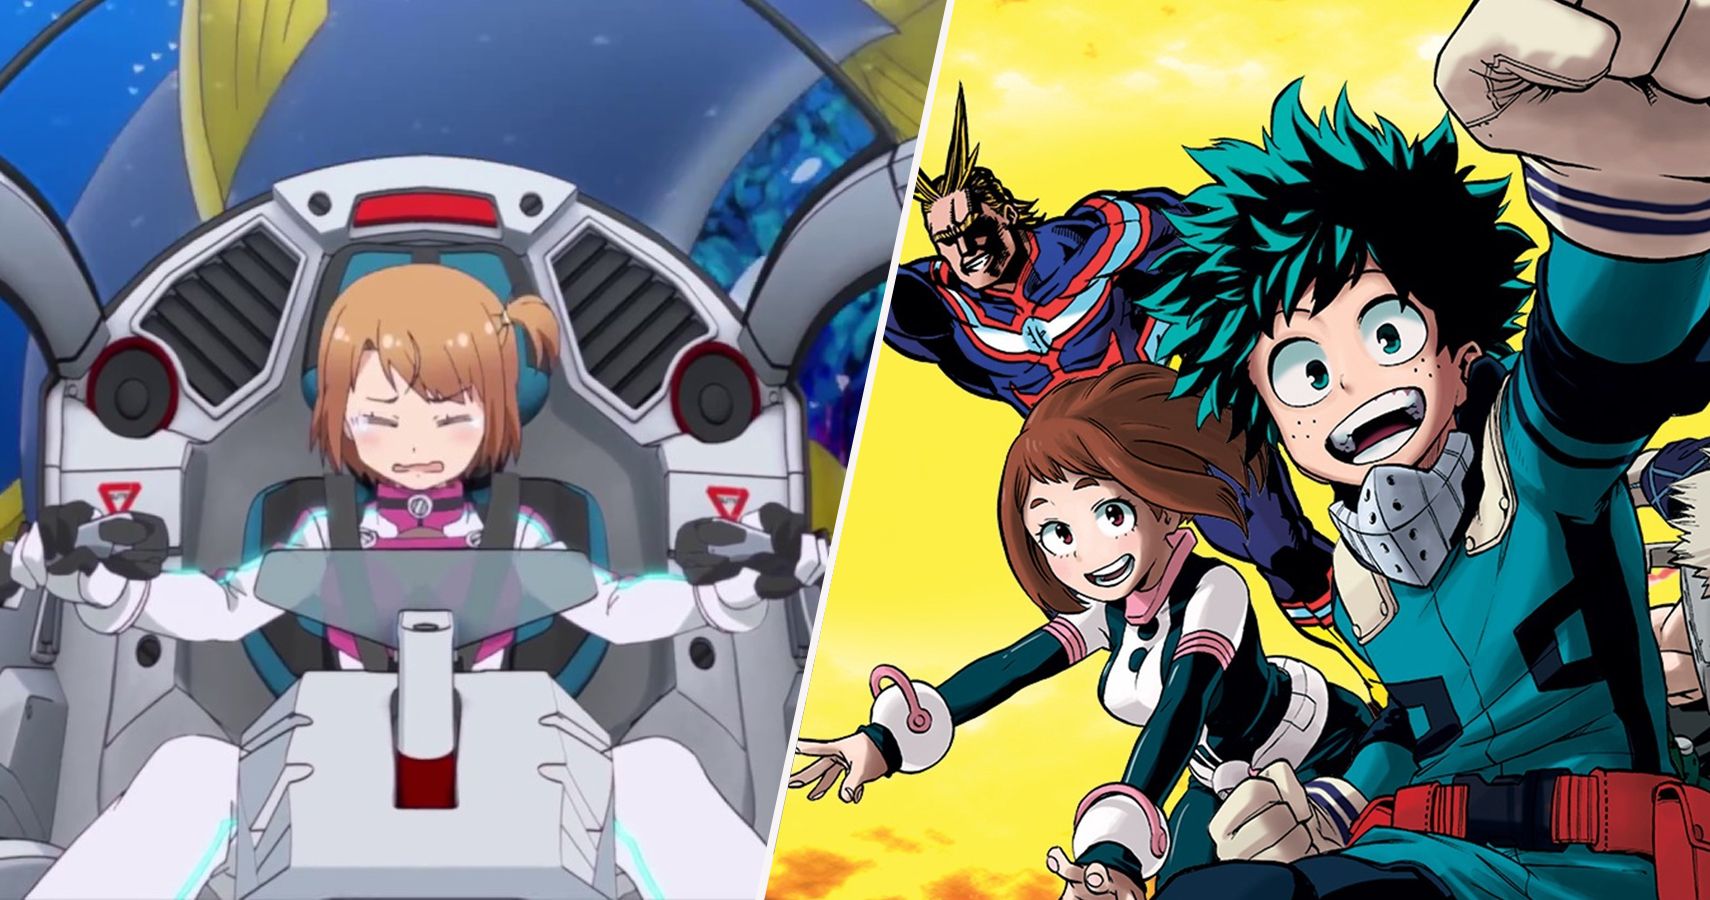 The 10 Worst Netflix Anime Of 2018 (And The 10 Best)